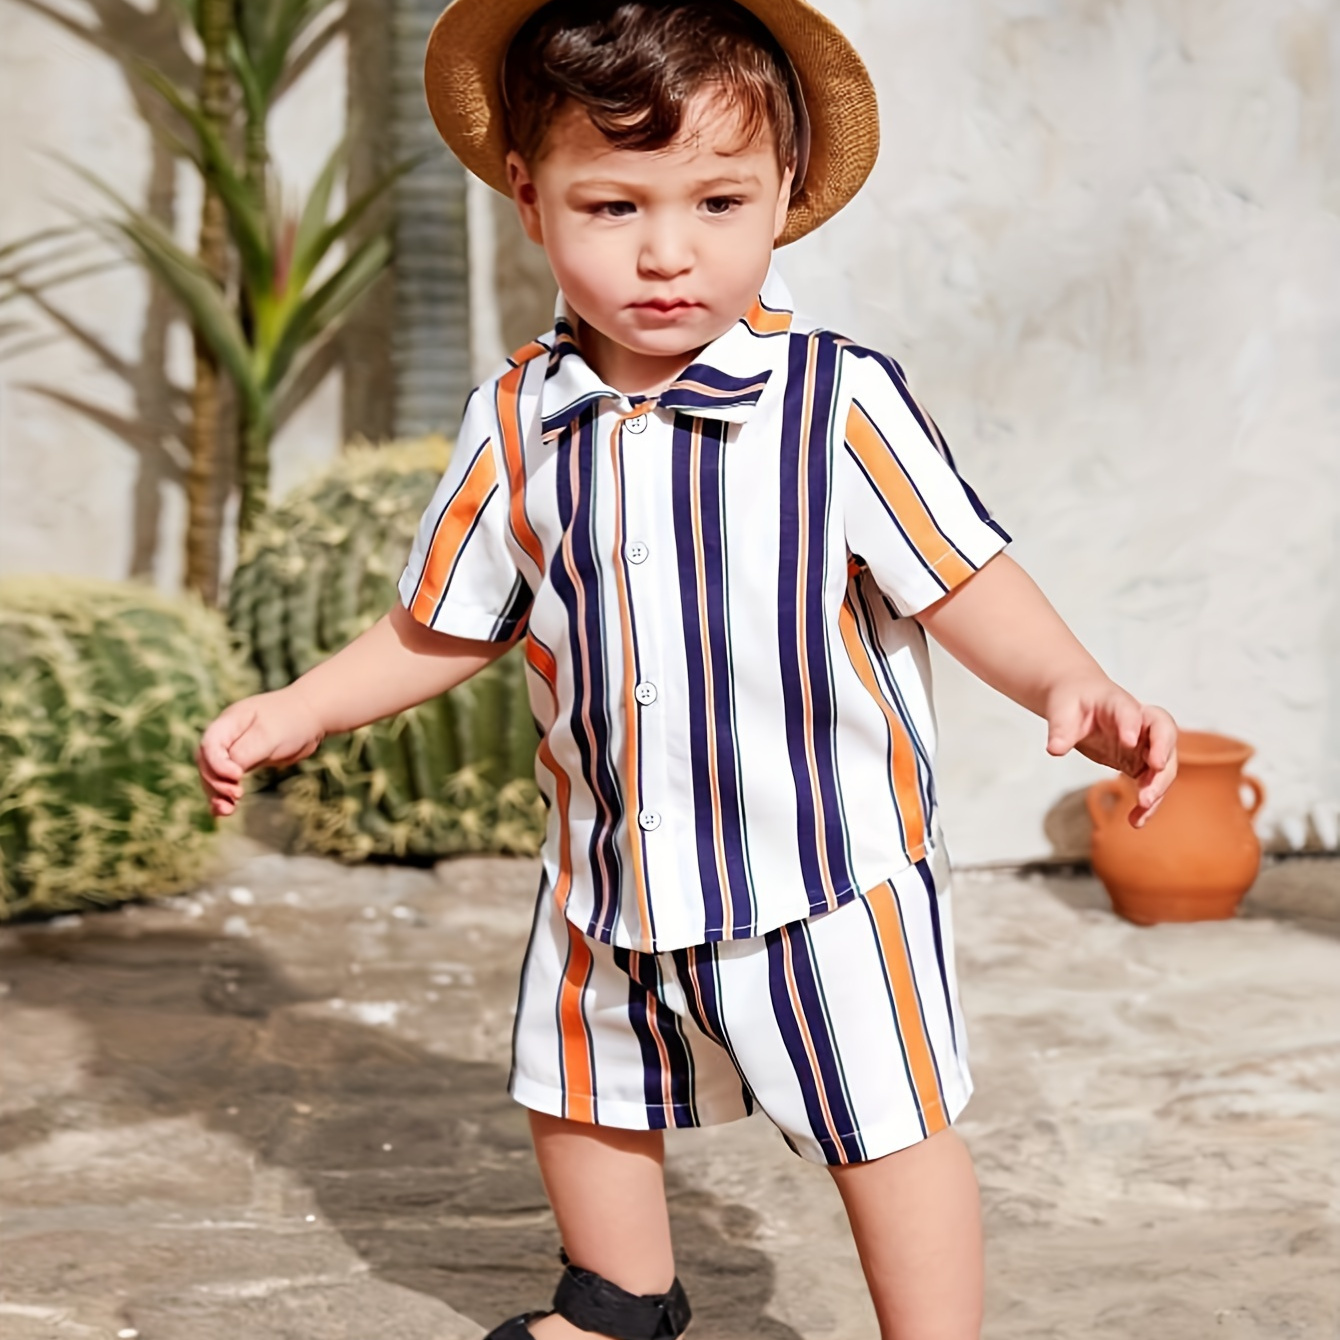 

Toddler Boys' 2-piece Set Fashion Casual Vertical Stripe Shirt & Shorts Outfit For Summer